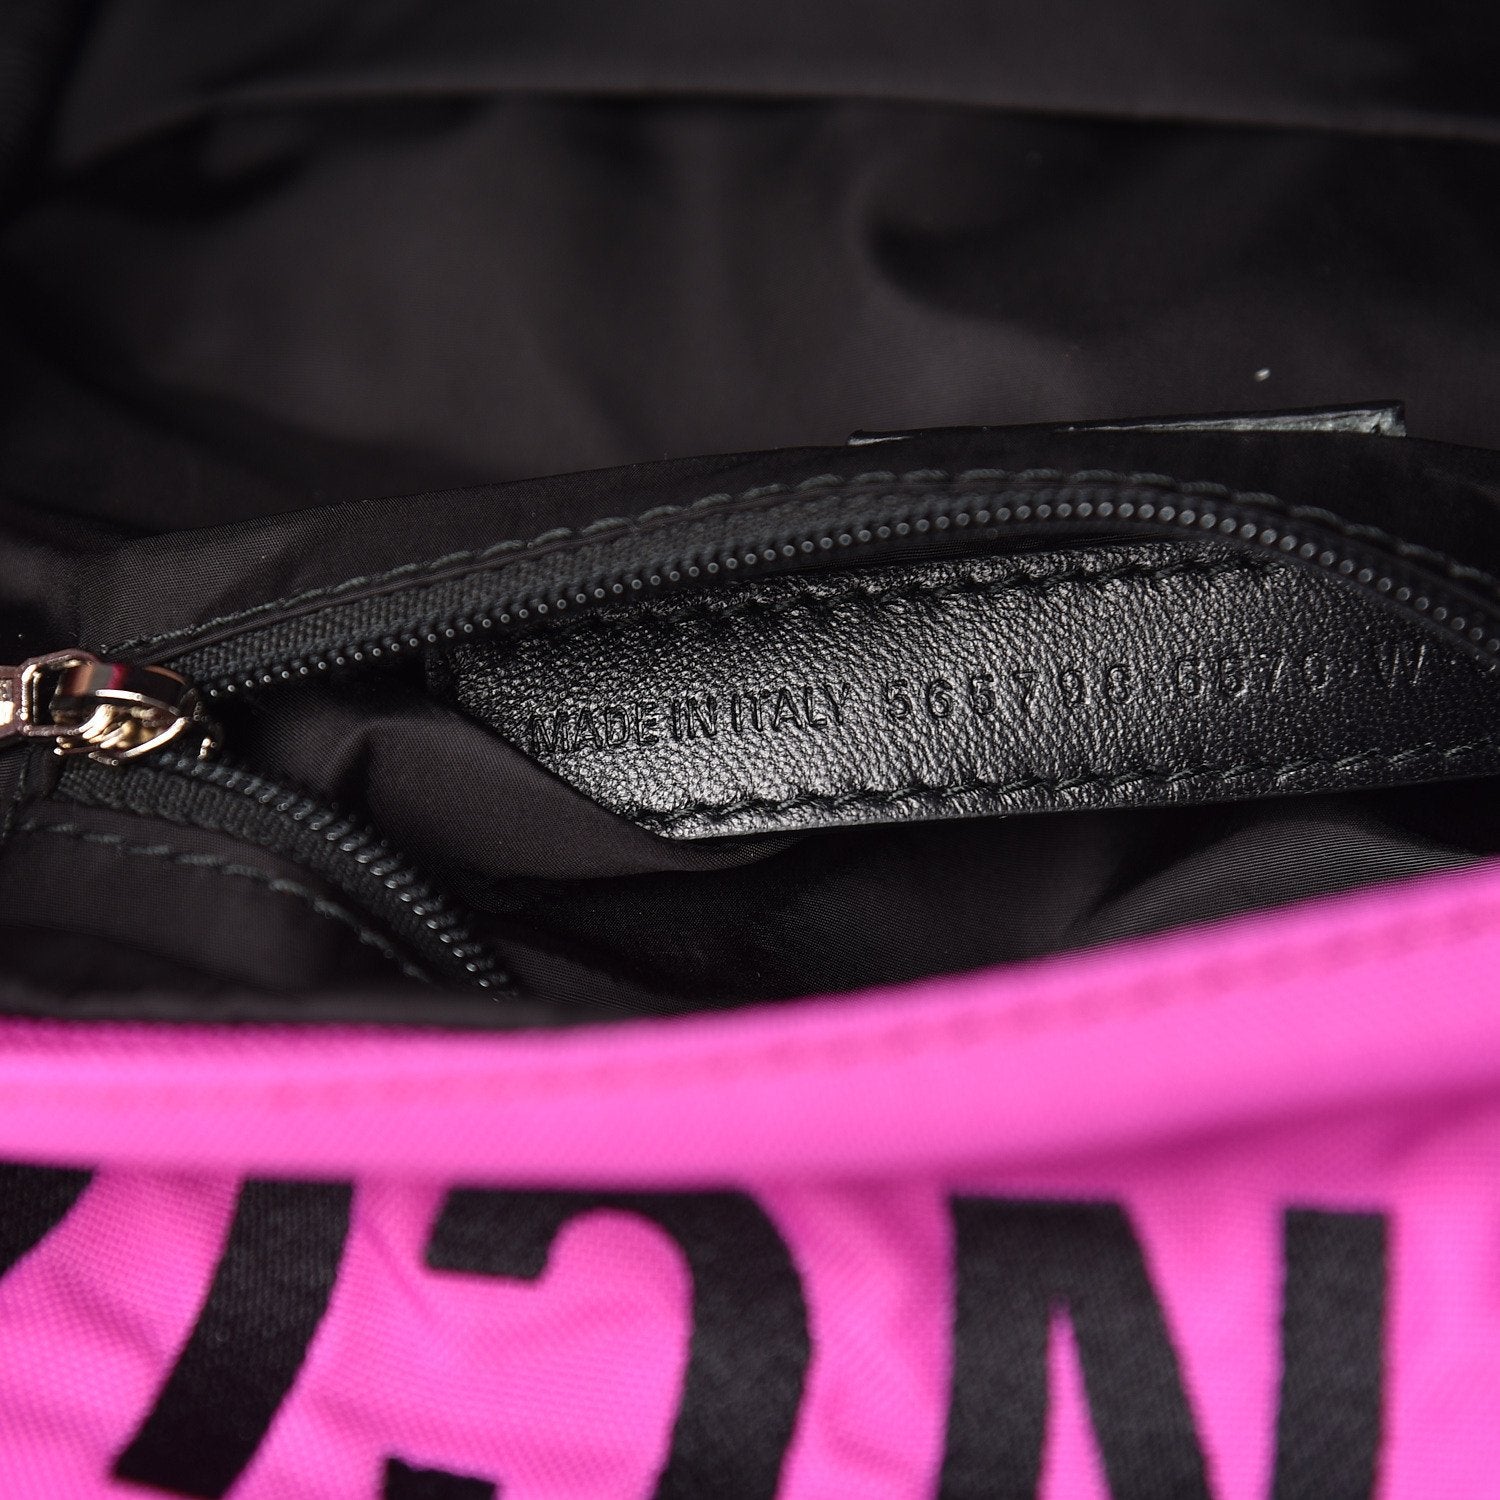 Balenciaga Logo Embroidered Sport Nylon Pink Backpack 565798 at_Queen_Bee_of_Beverly_Hills